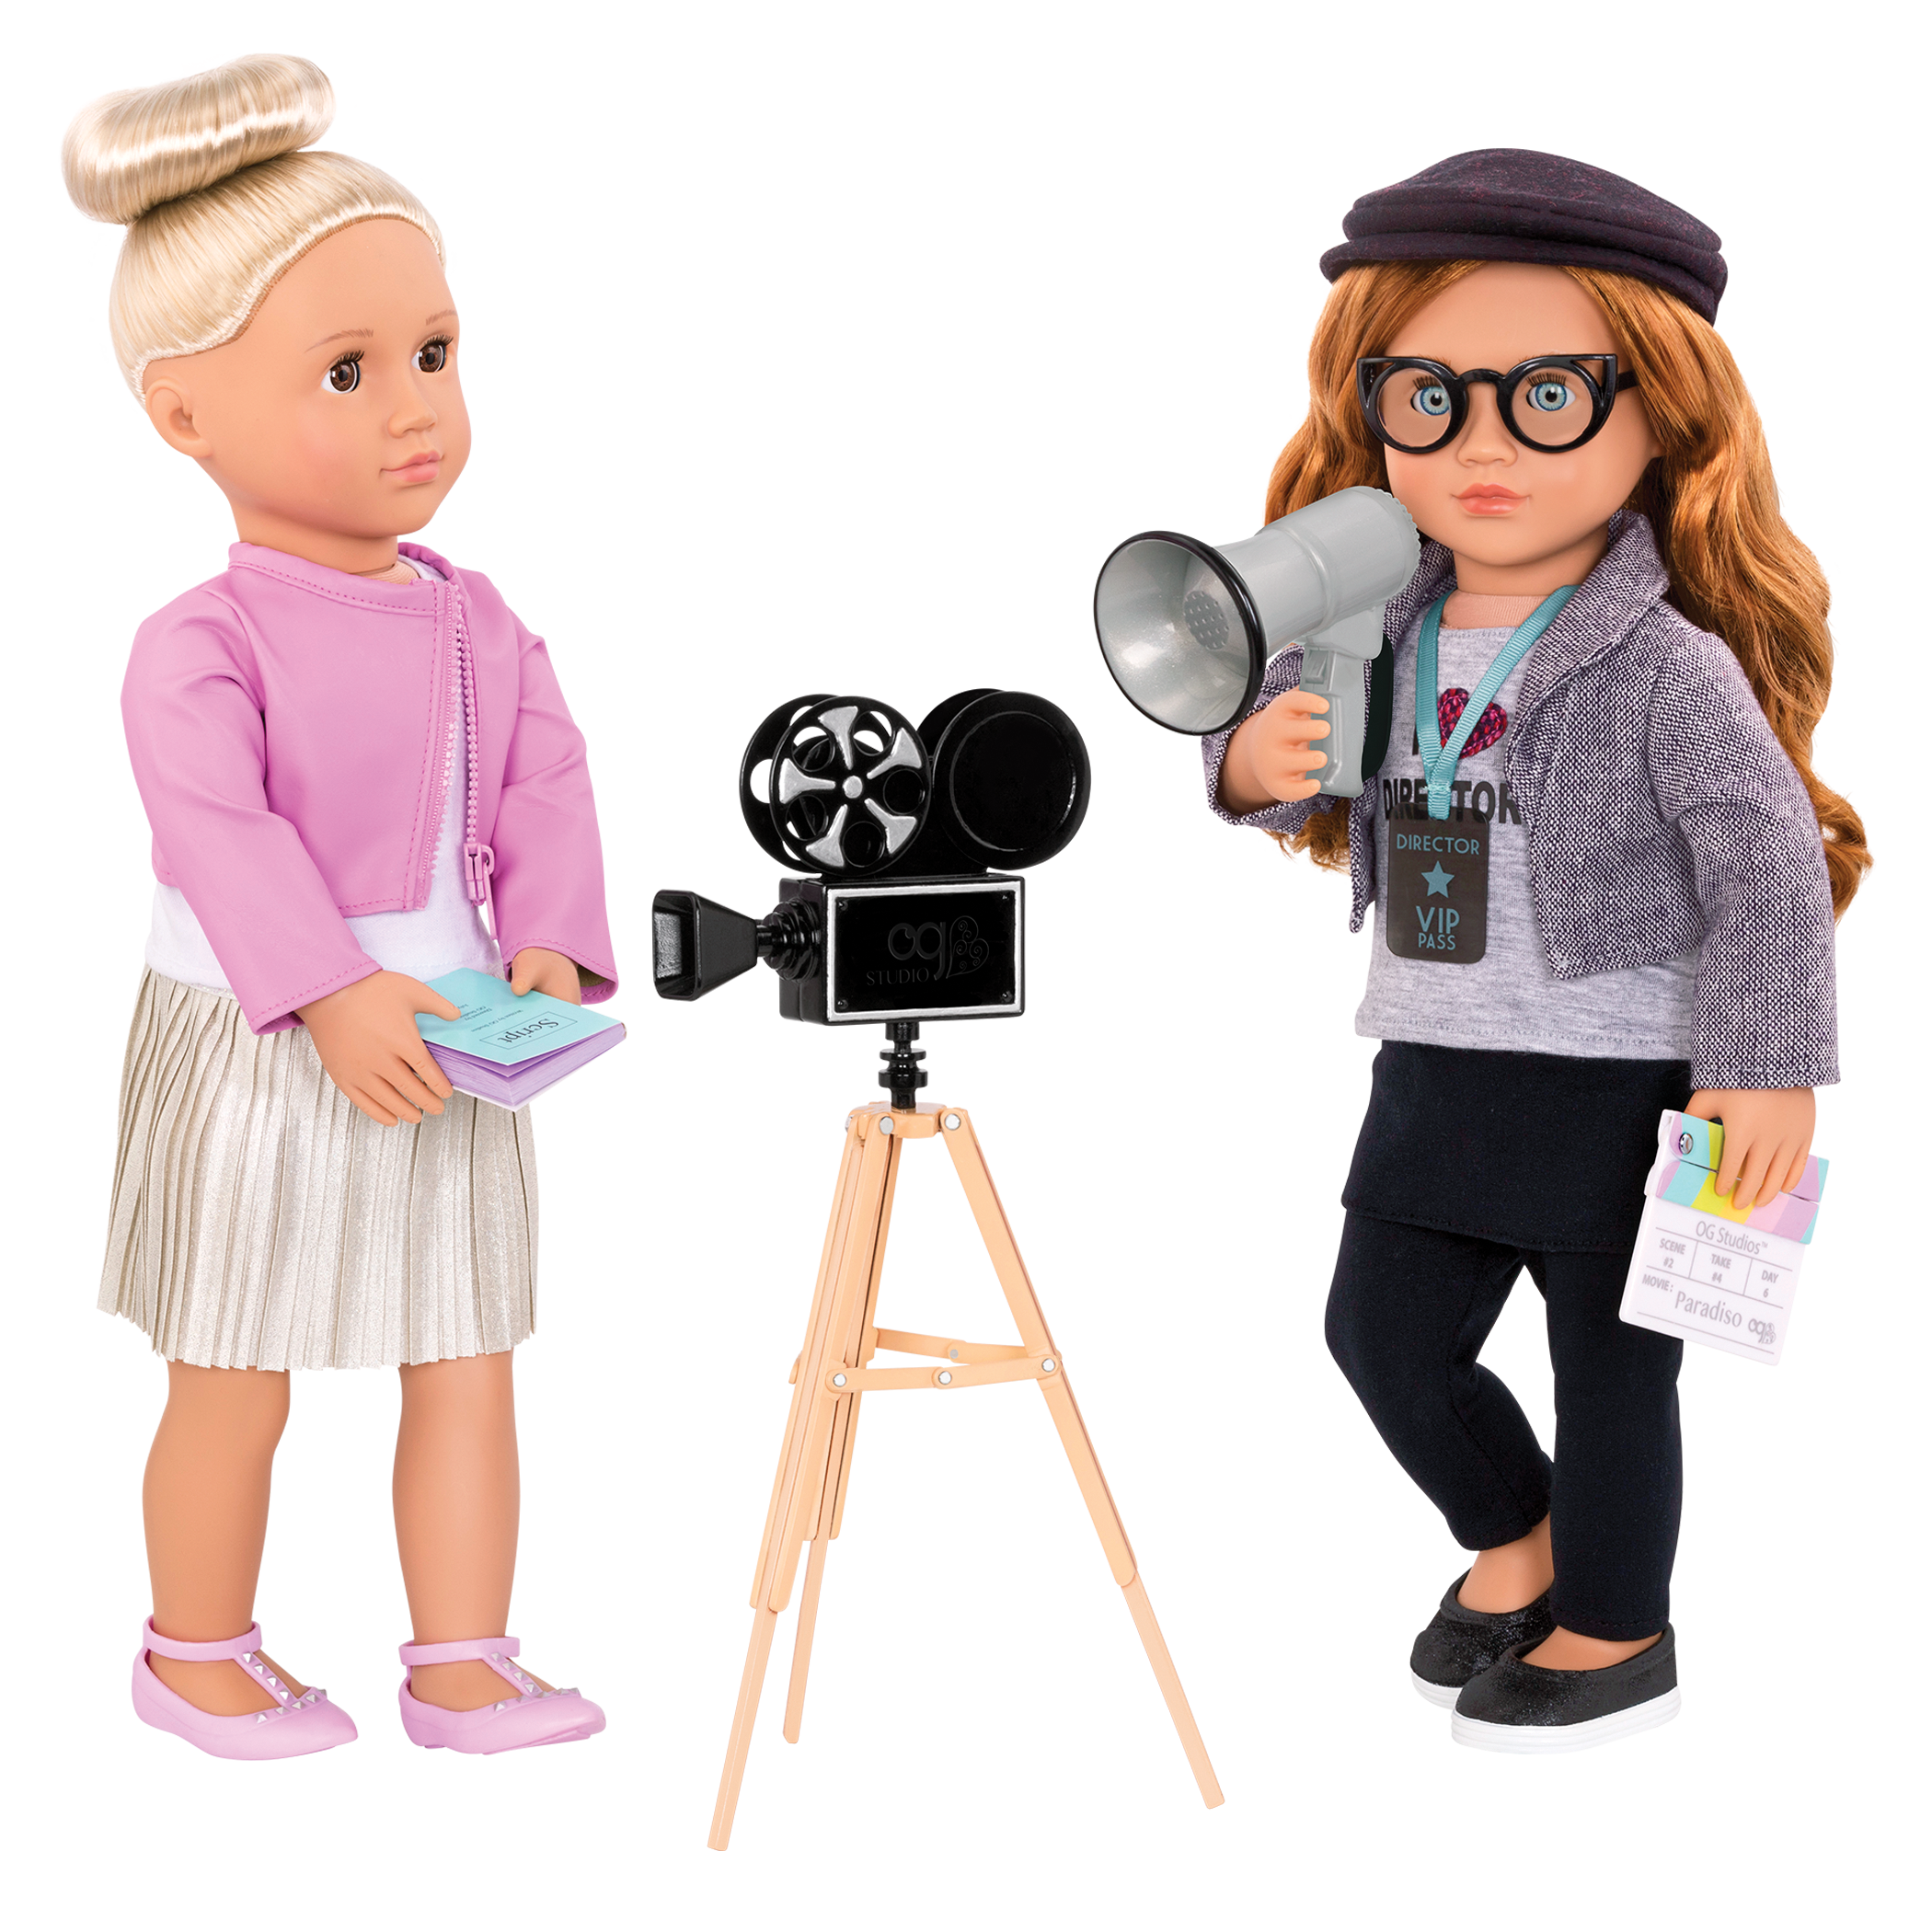 18-inch doll using moviemaker playset